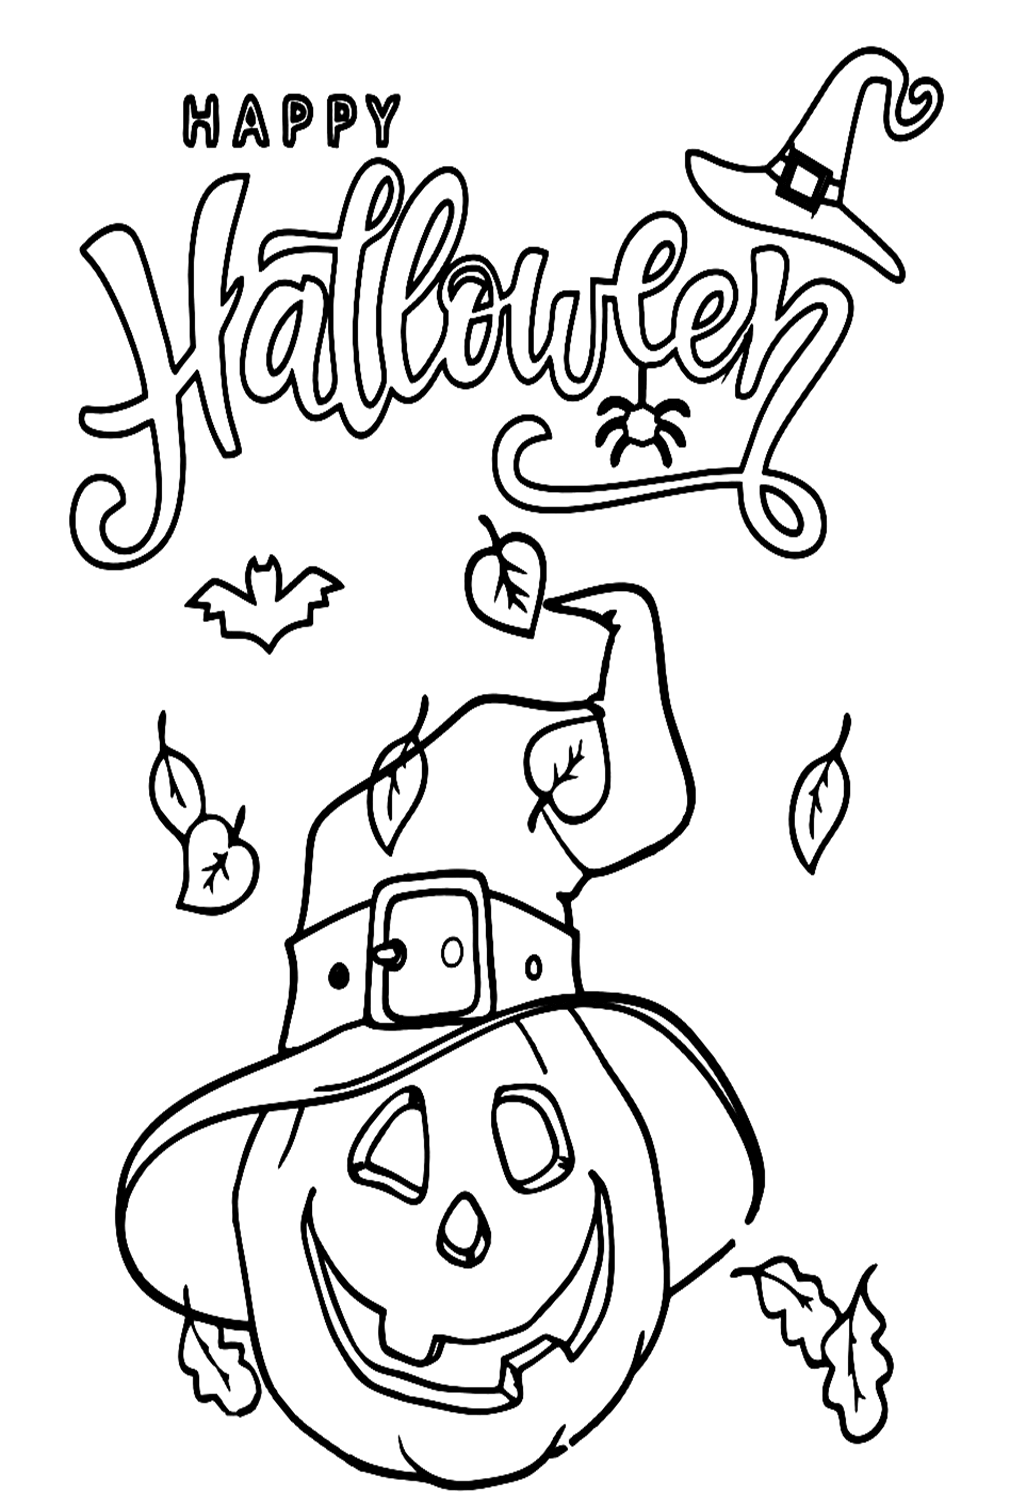 Halloween Pumpkin Image Coloring Pages